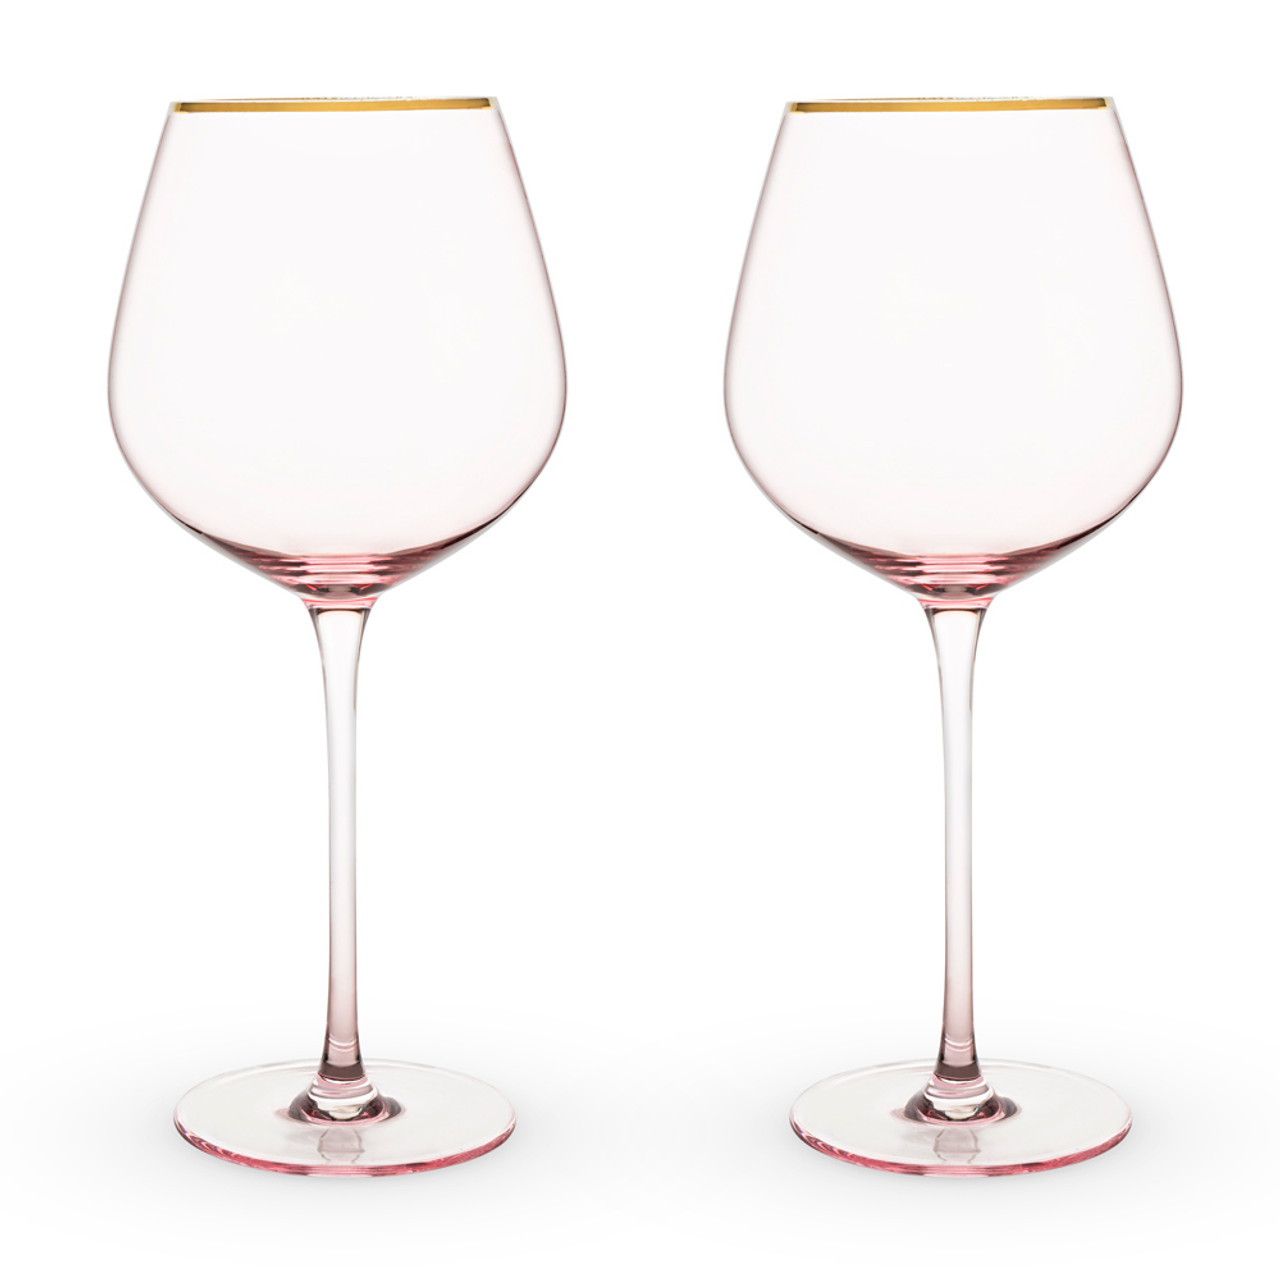 https://cdn11.bigcommerce.com/s-cznxq08r7/images/stencil/1280x1280/products/1605/3033/6162-red-rose-tinted-crystal-red-wine-glasses-with-gold-rims-20-oz-set-of-2_01__33896.1590768370.jpg?c=1